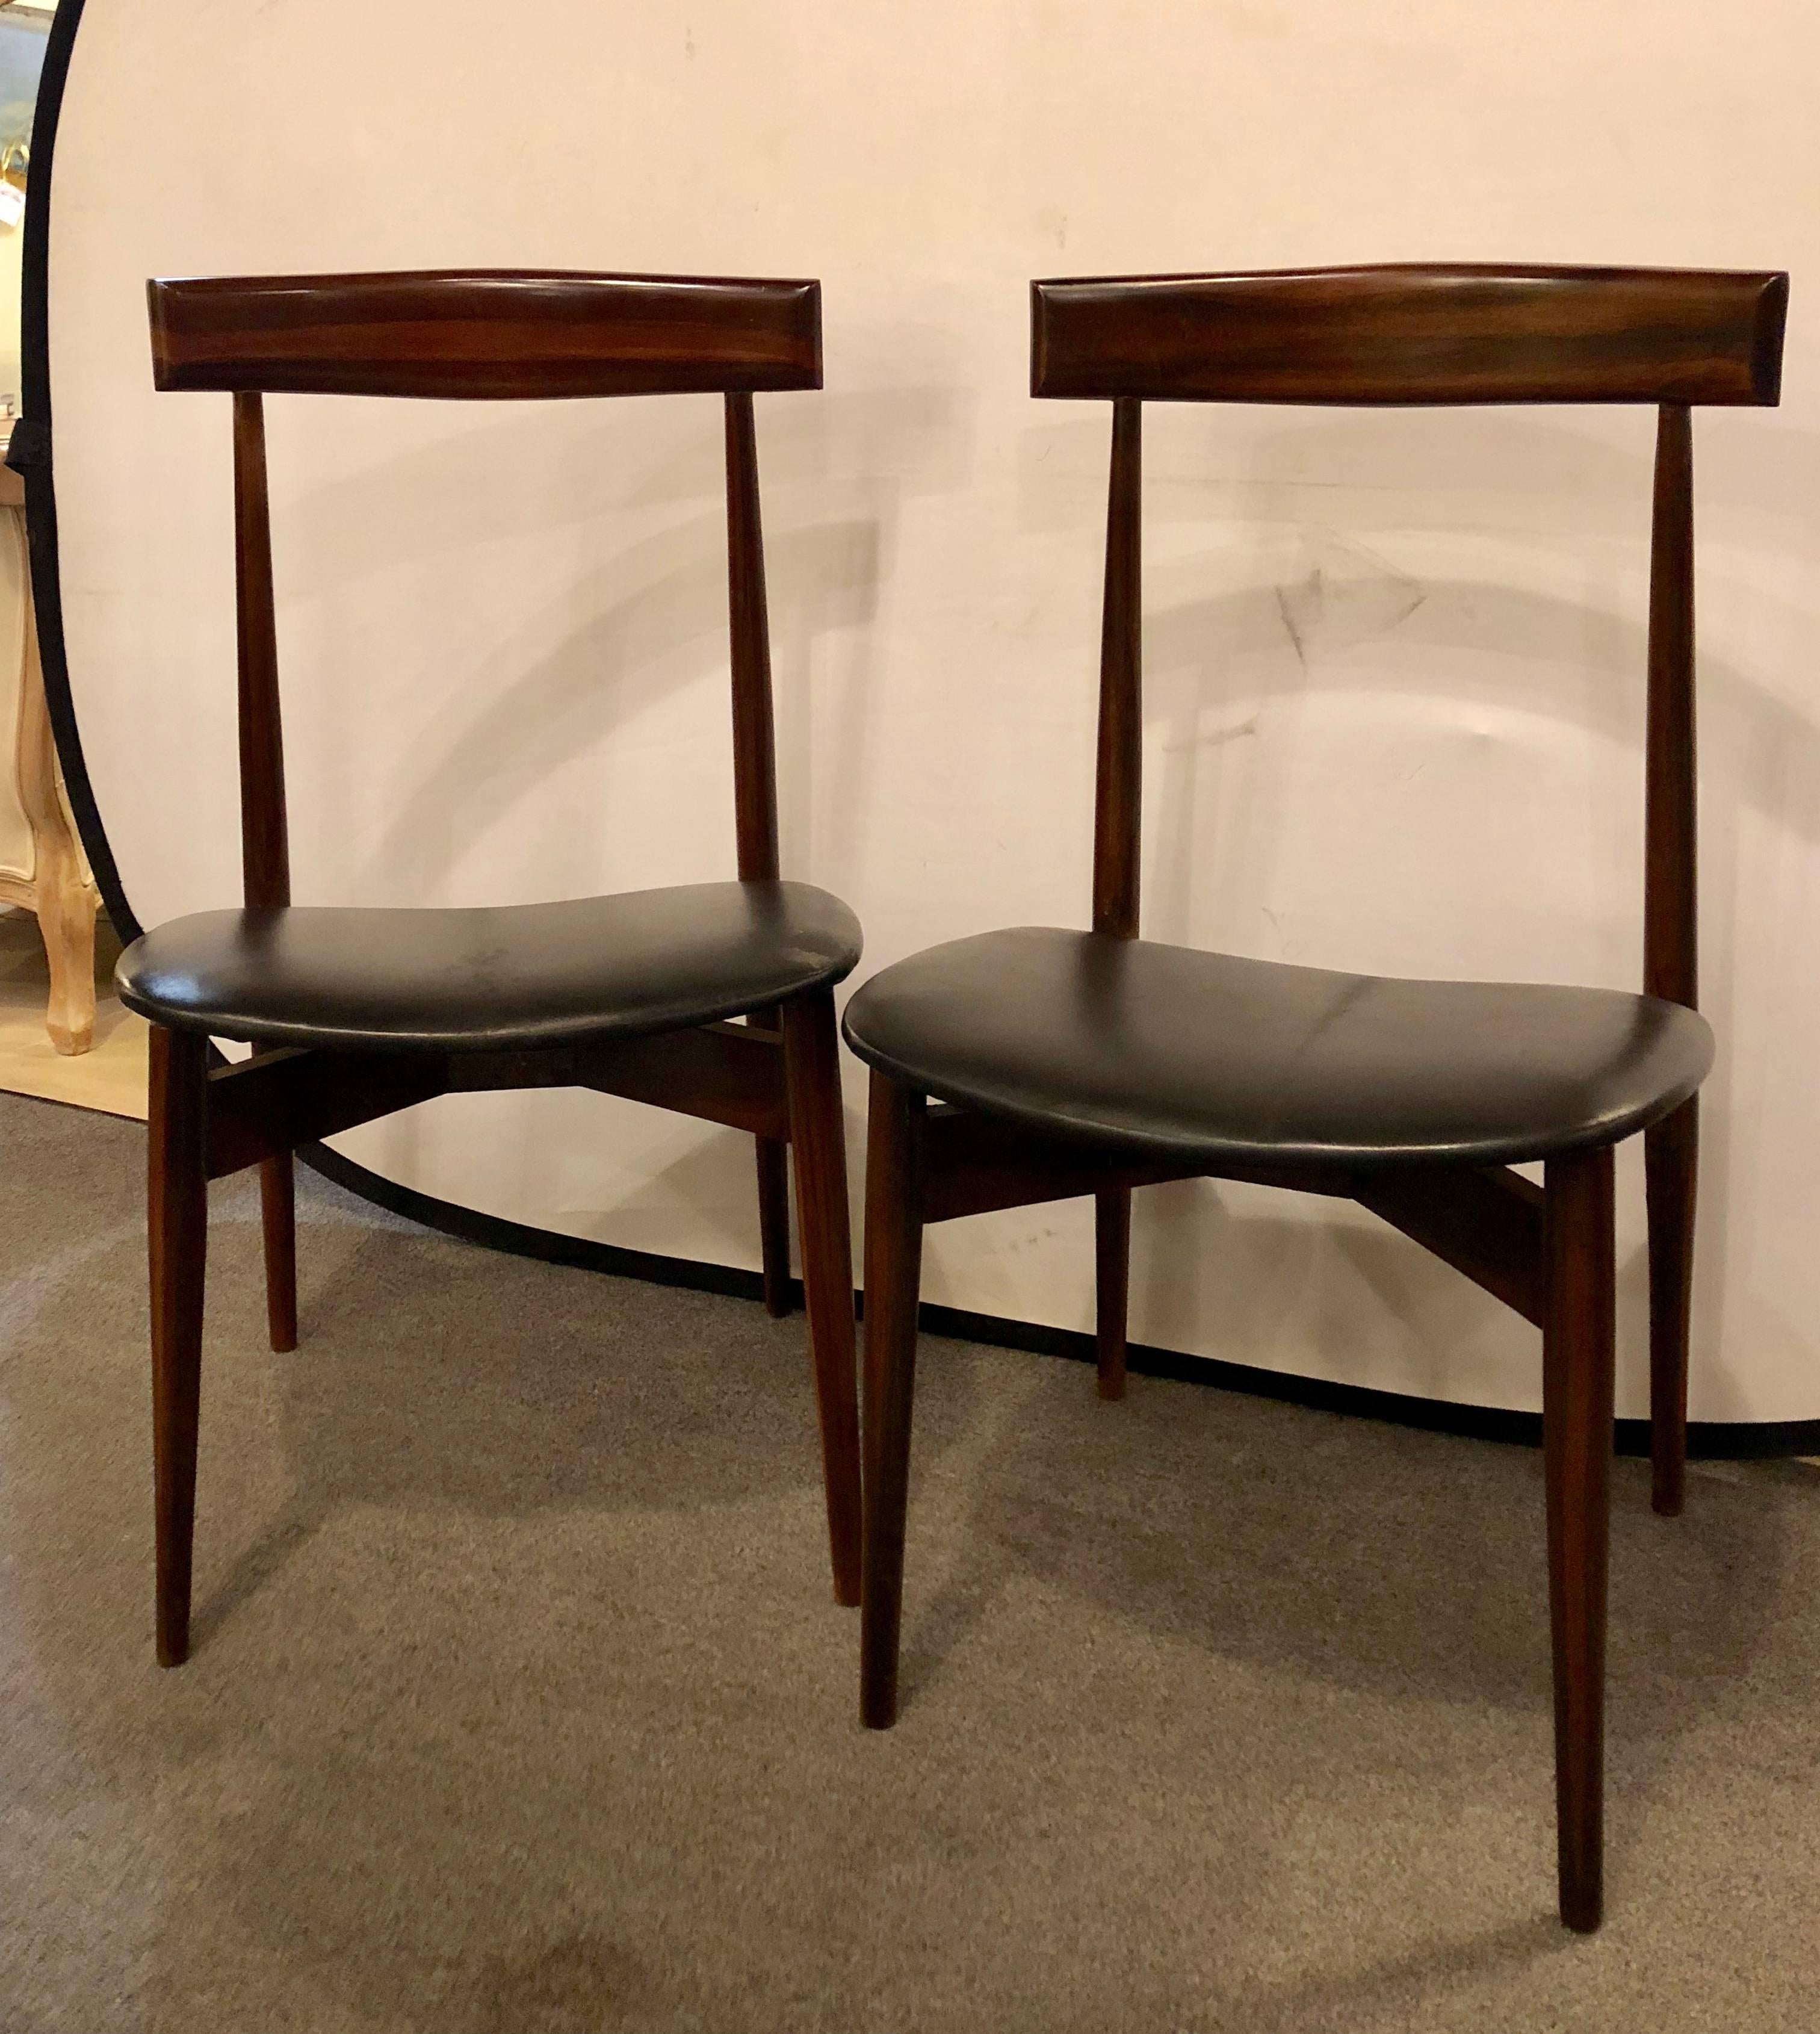 Set of four Mid-Century Modern slat back black leather side chairs. Each in a rosewood finish with new seat cushions.